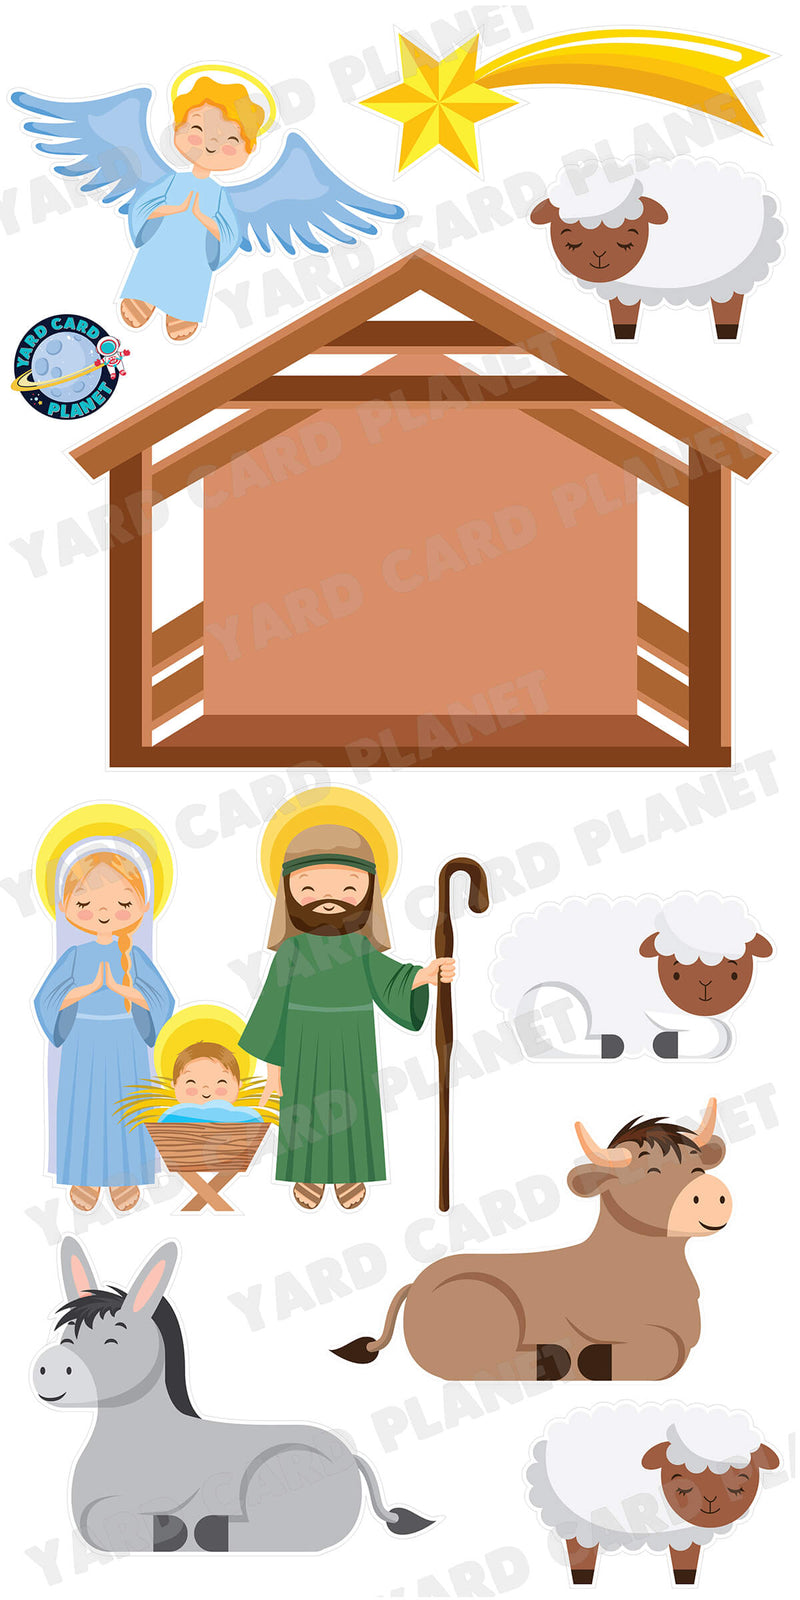 Large Complete Christmas Nativity Scene Yard Card Flair Set - Part 1